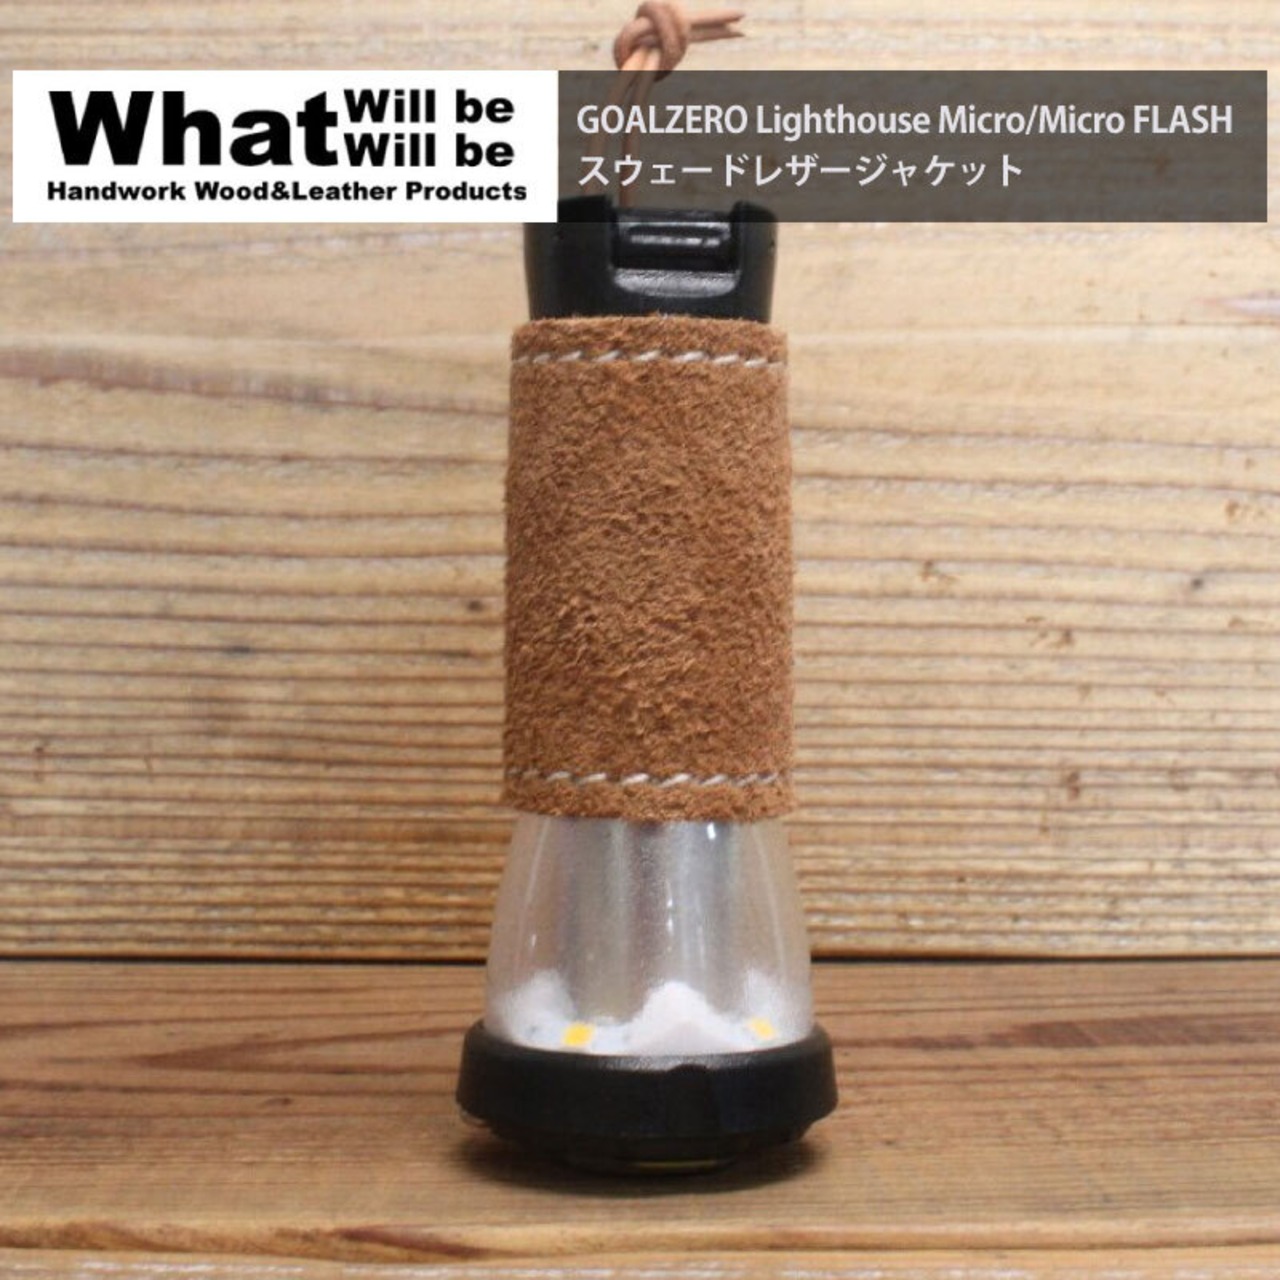 What will be will be GOALZERO Lighthouse Micro/Micro FLASH スウェード レザー ジャケット